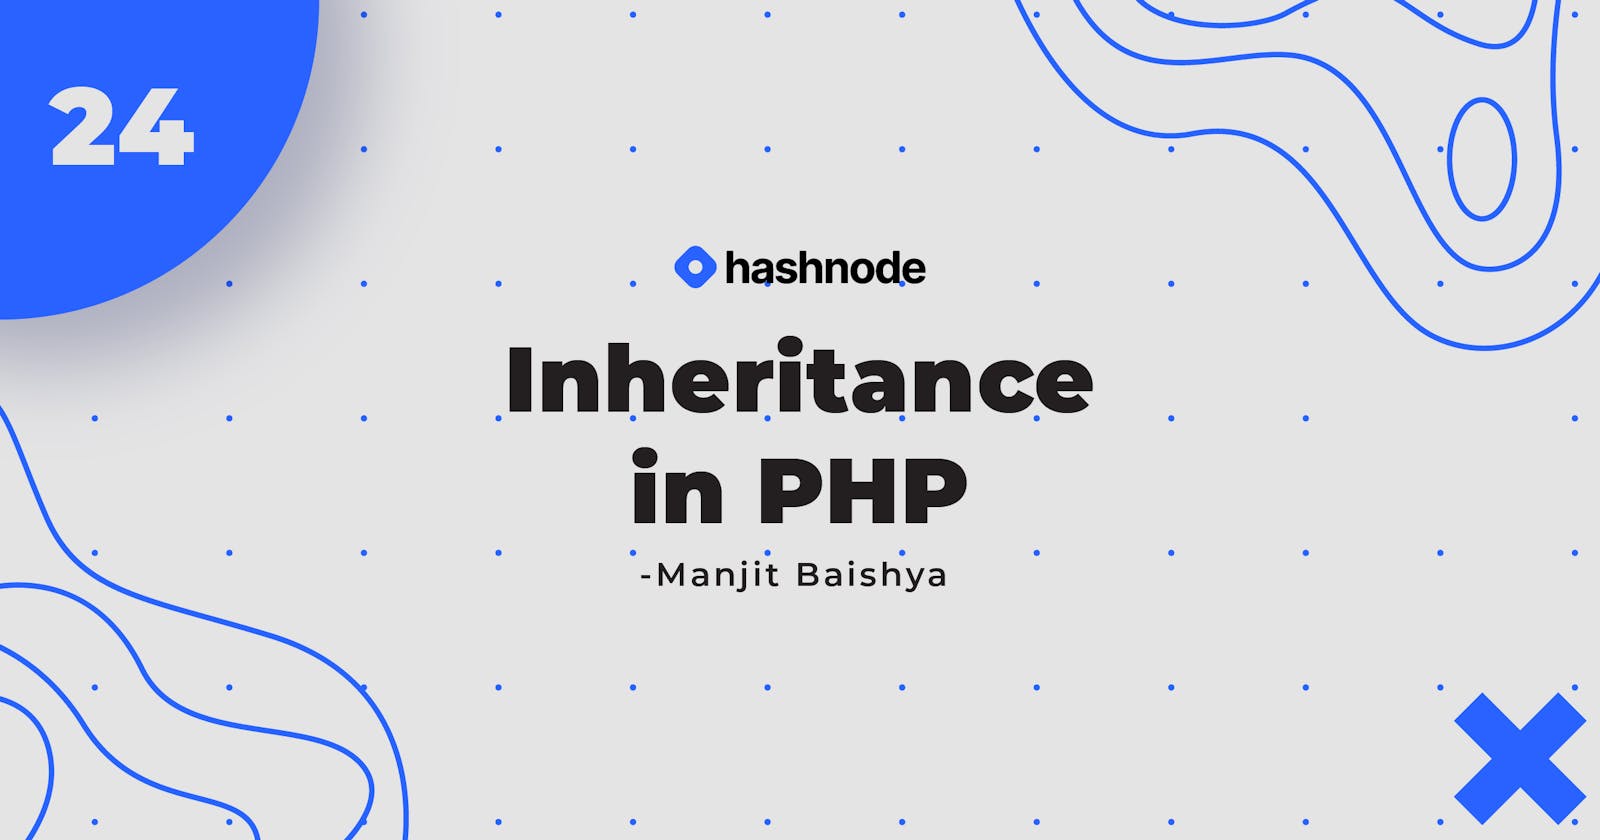 Day 24: Inheritance in PHP